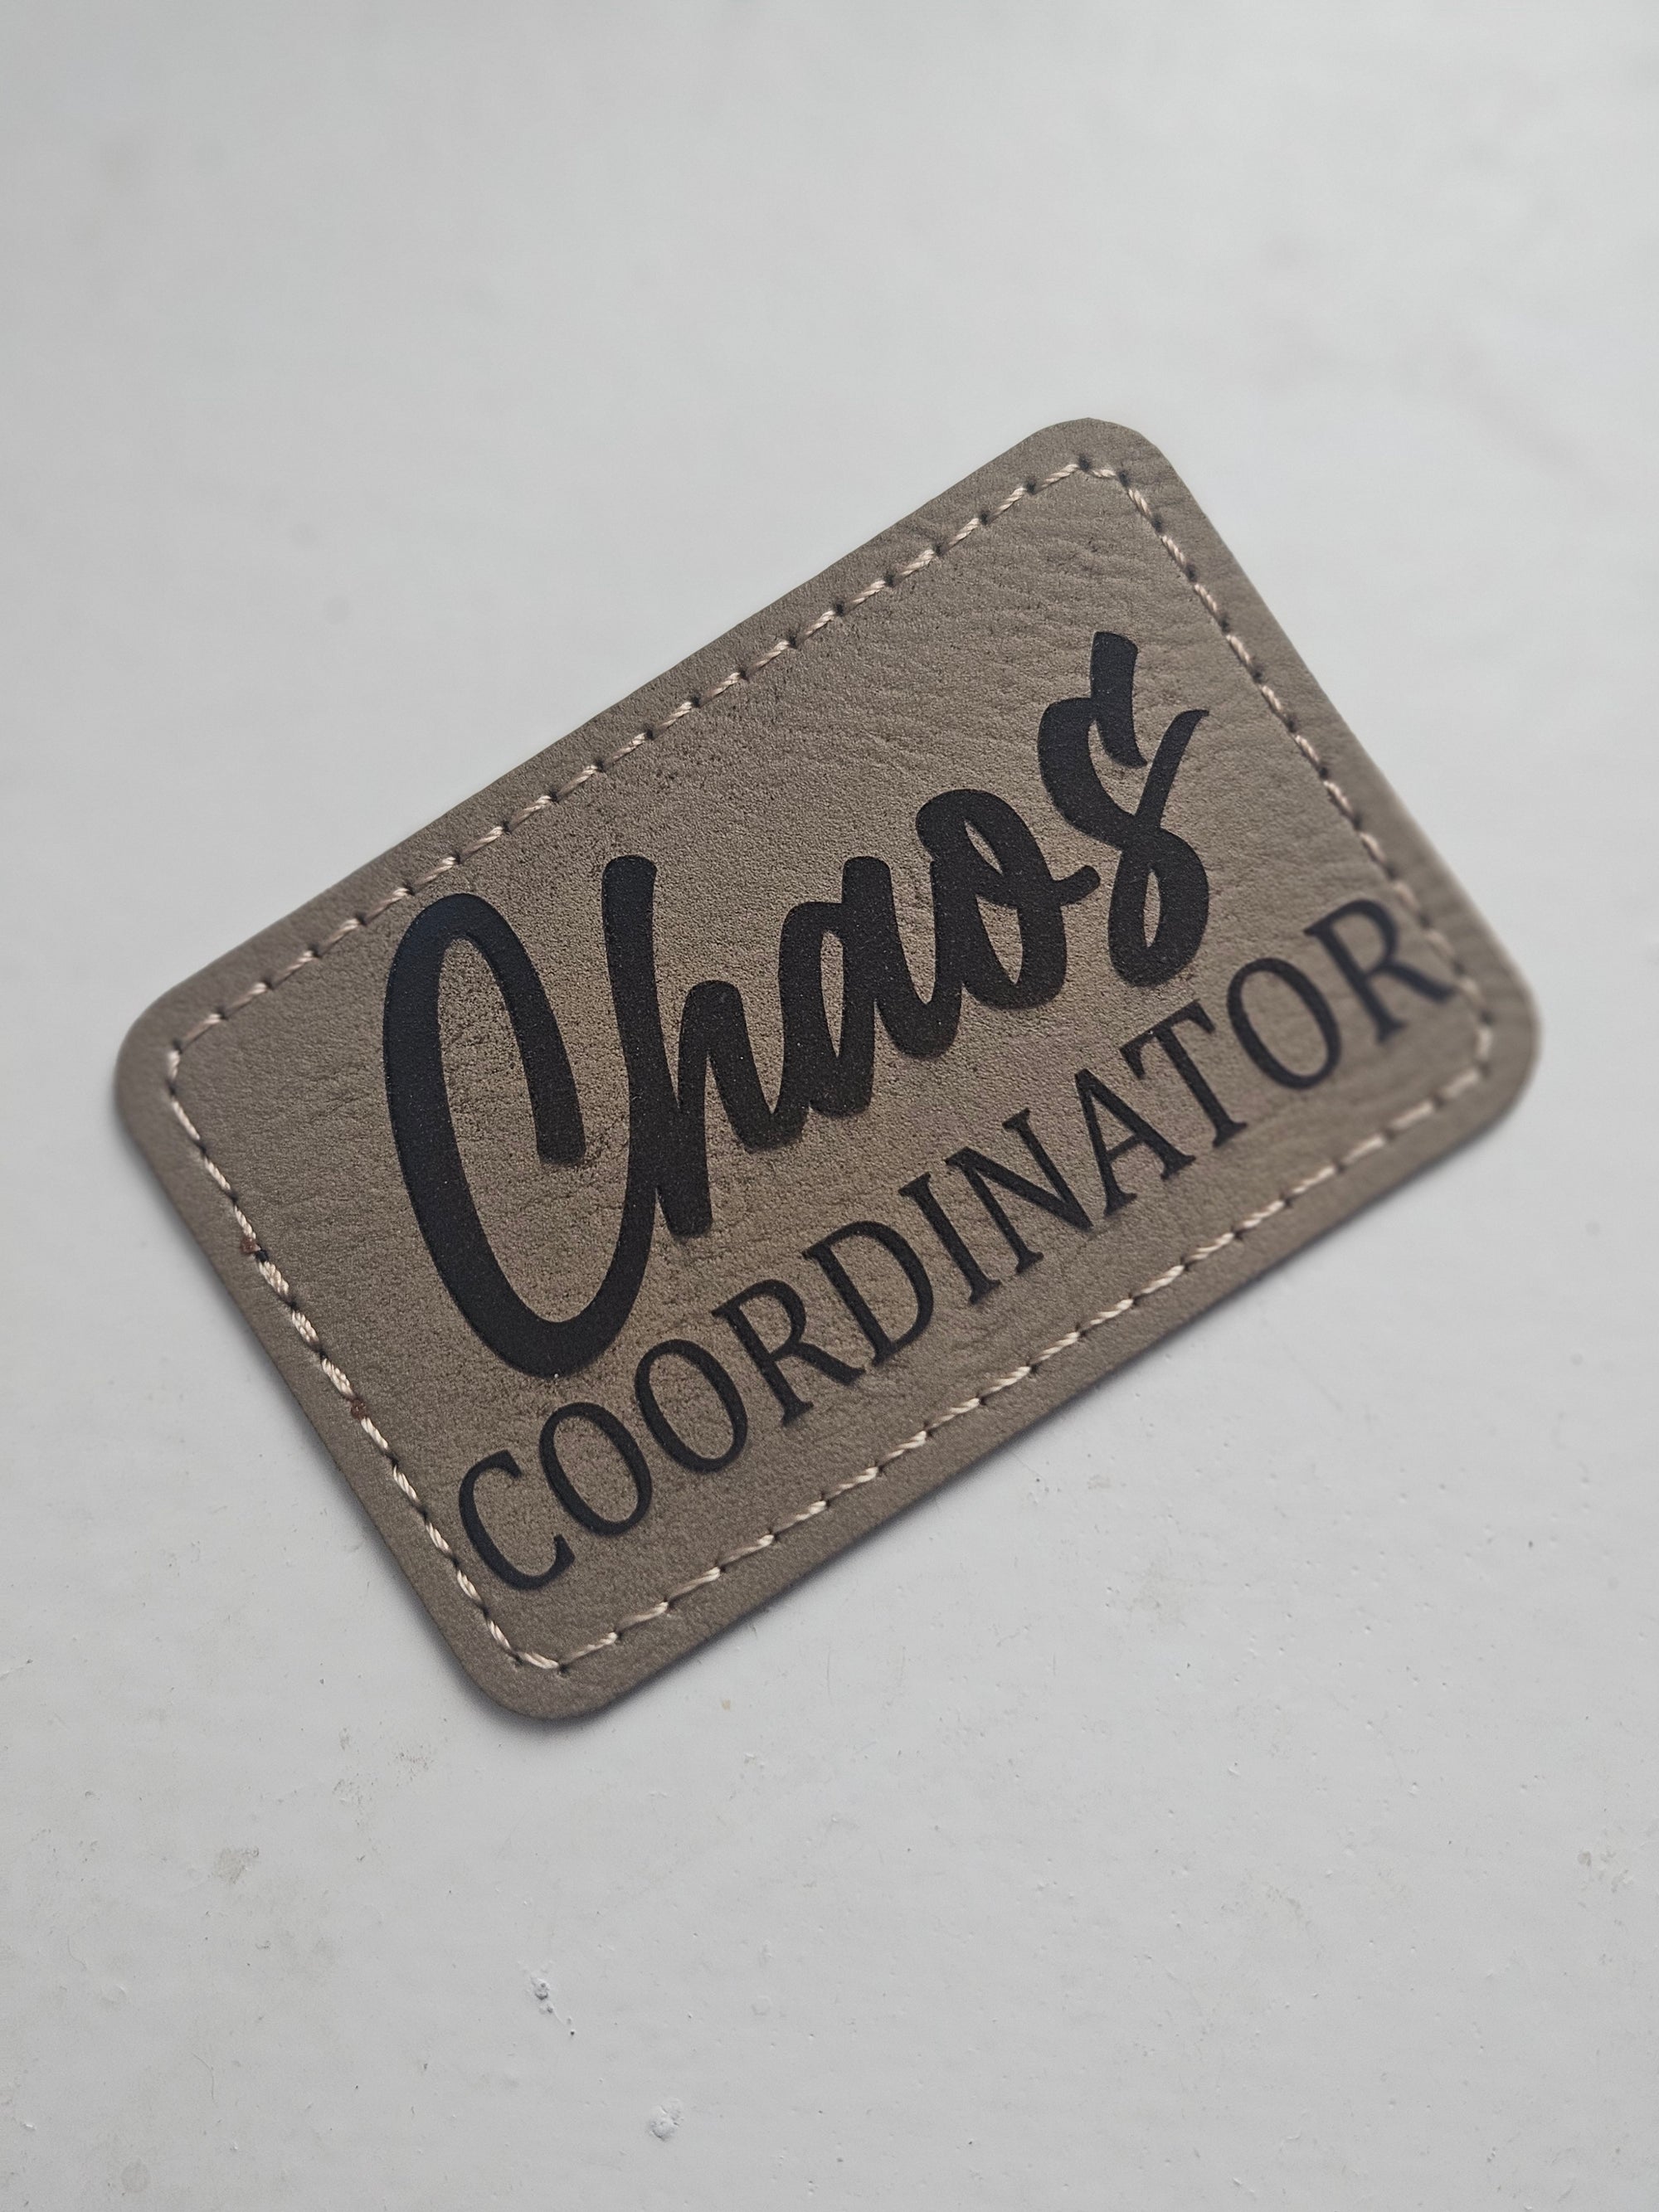 Chaos Coordinator Hat Patch